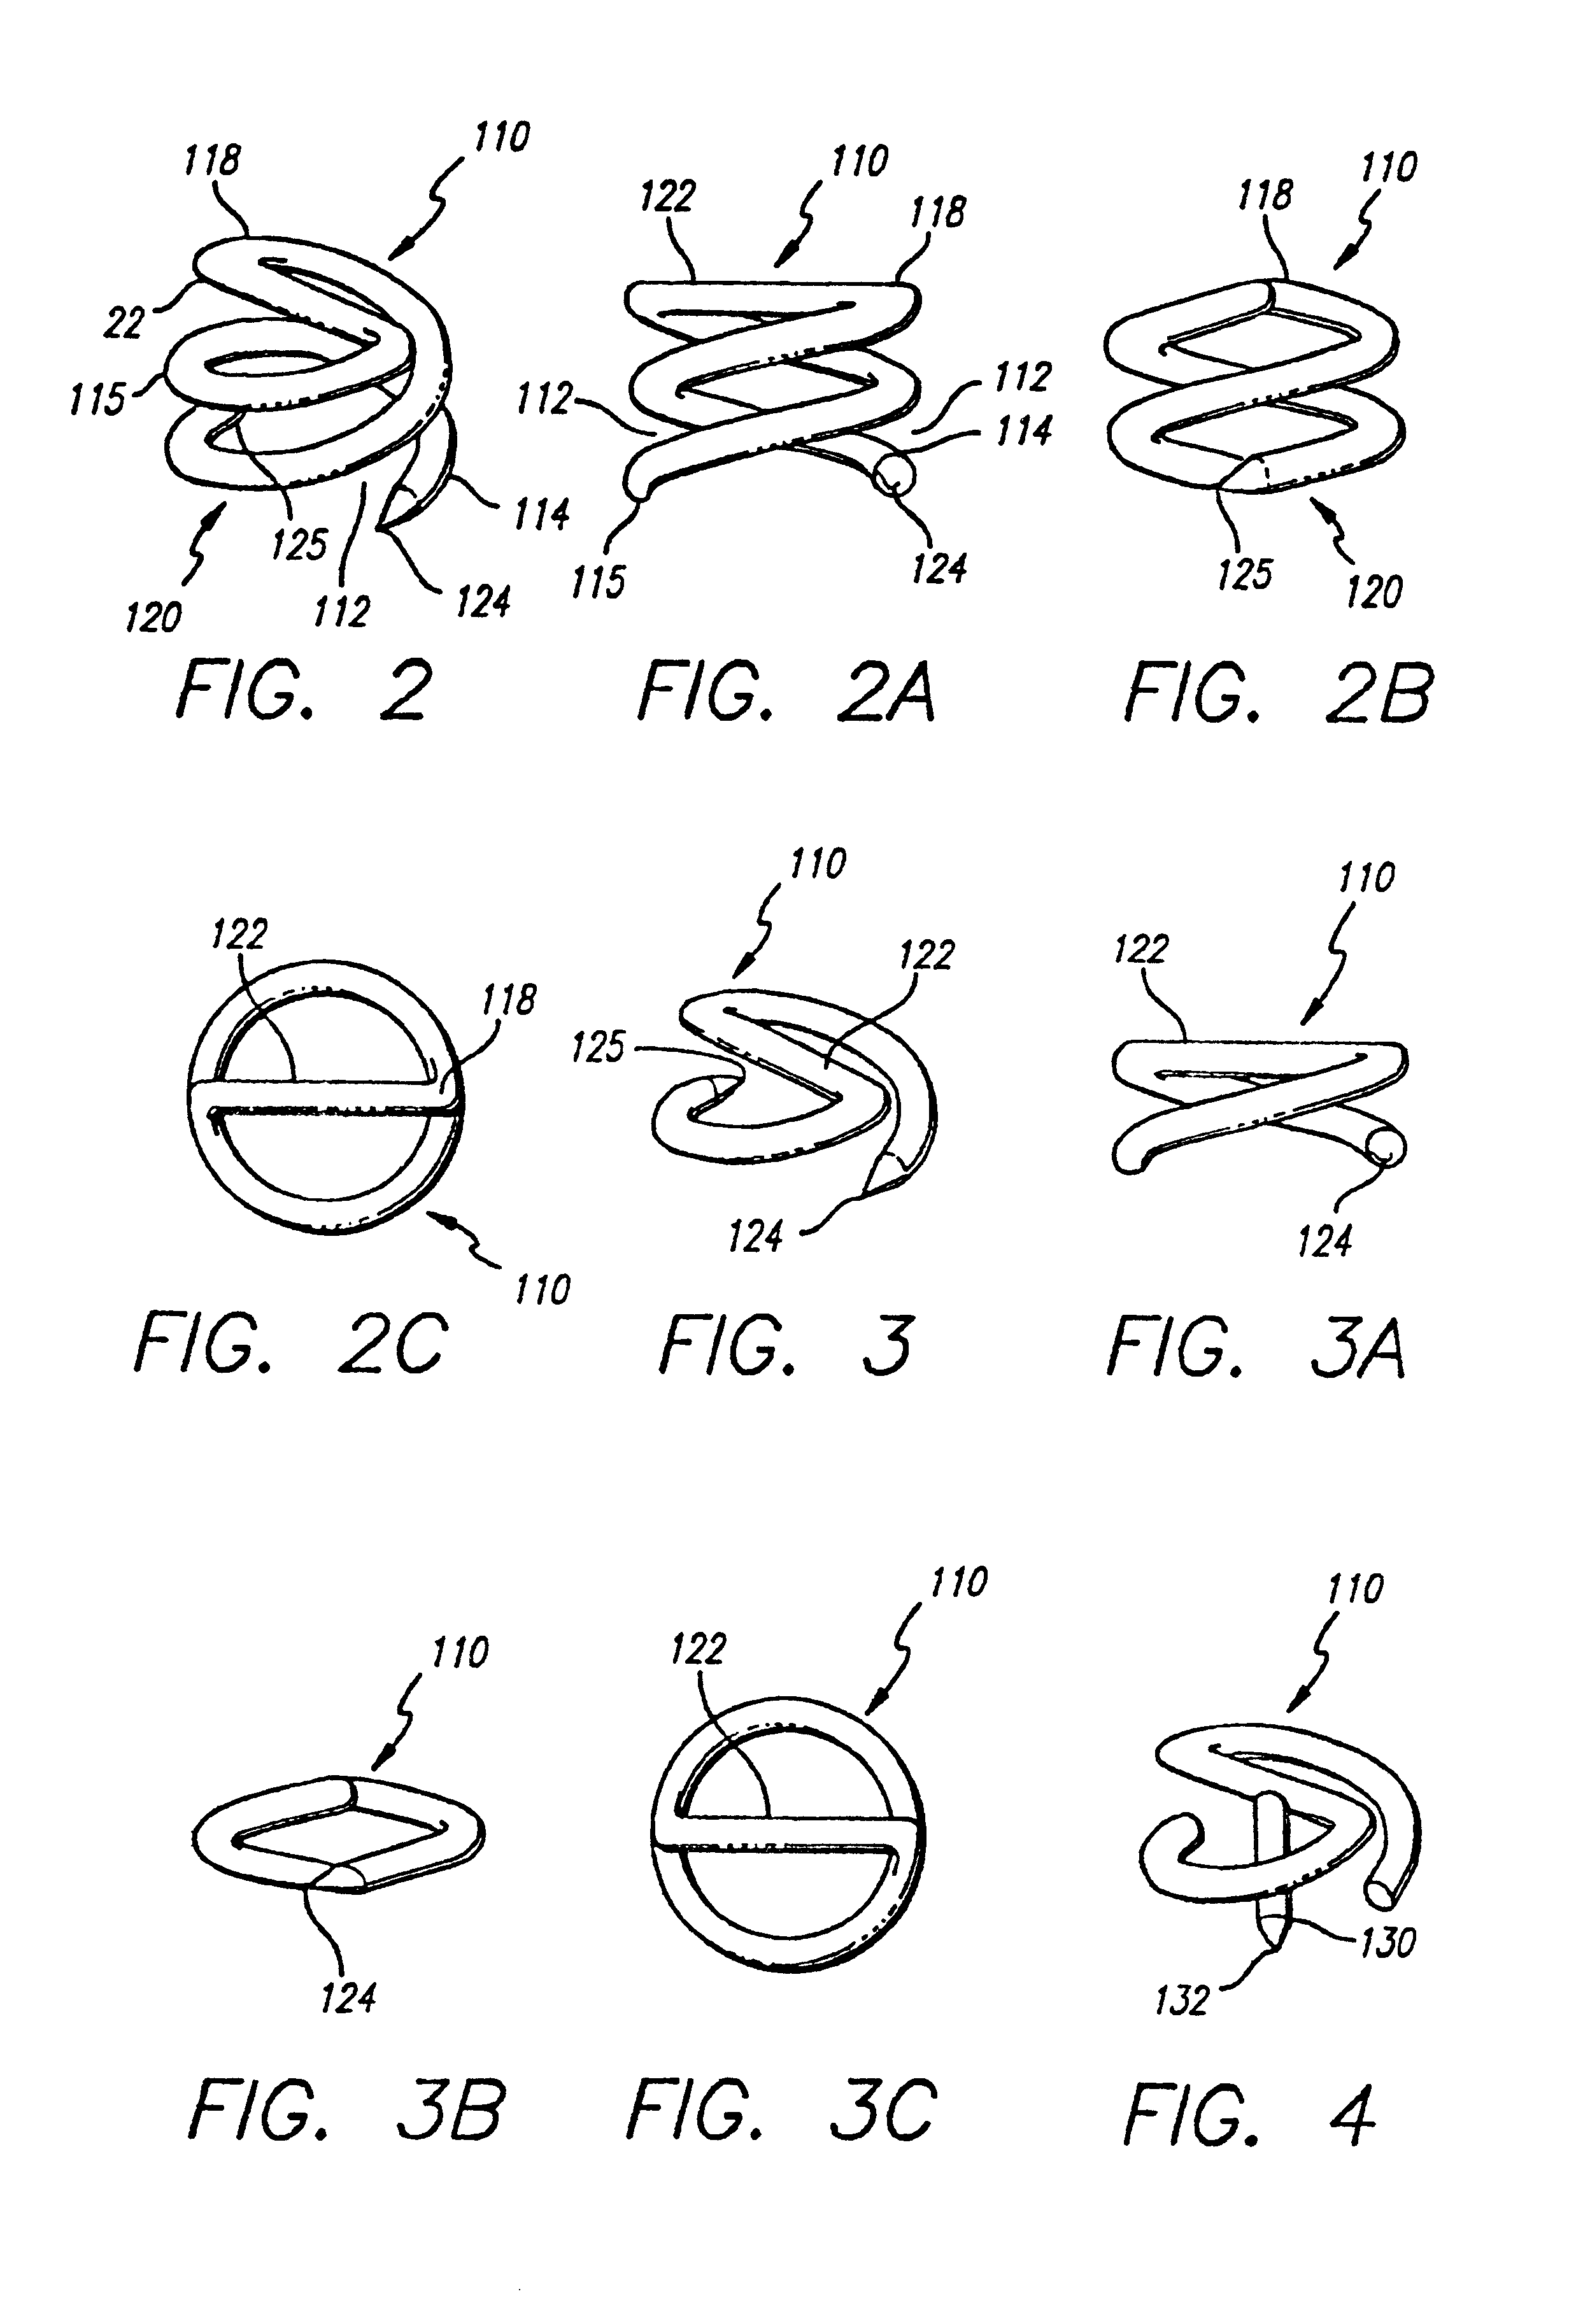 Surgical helical fastener with applicator